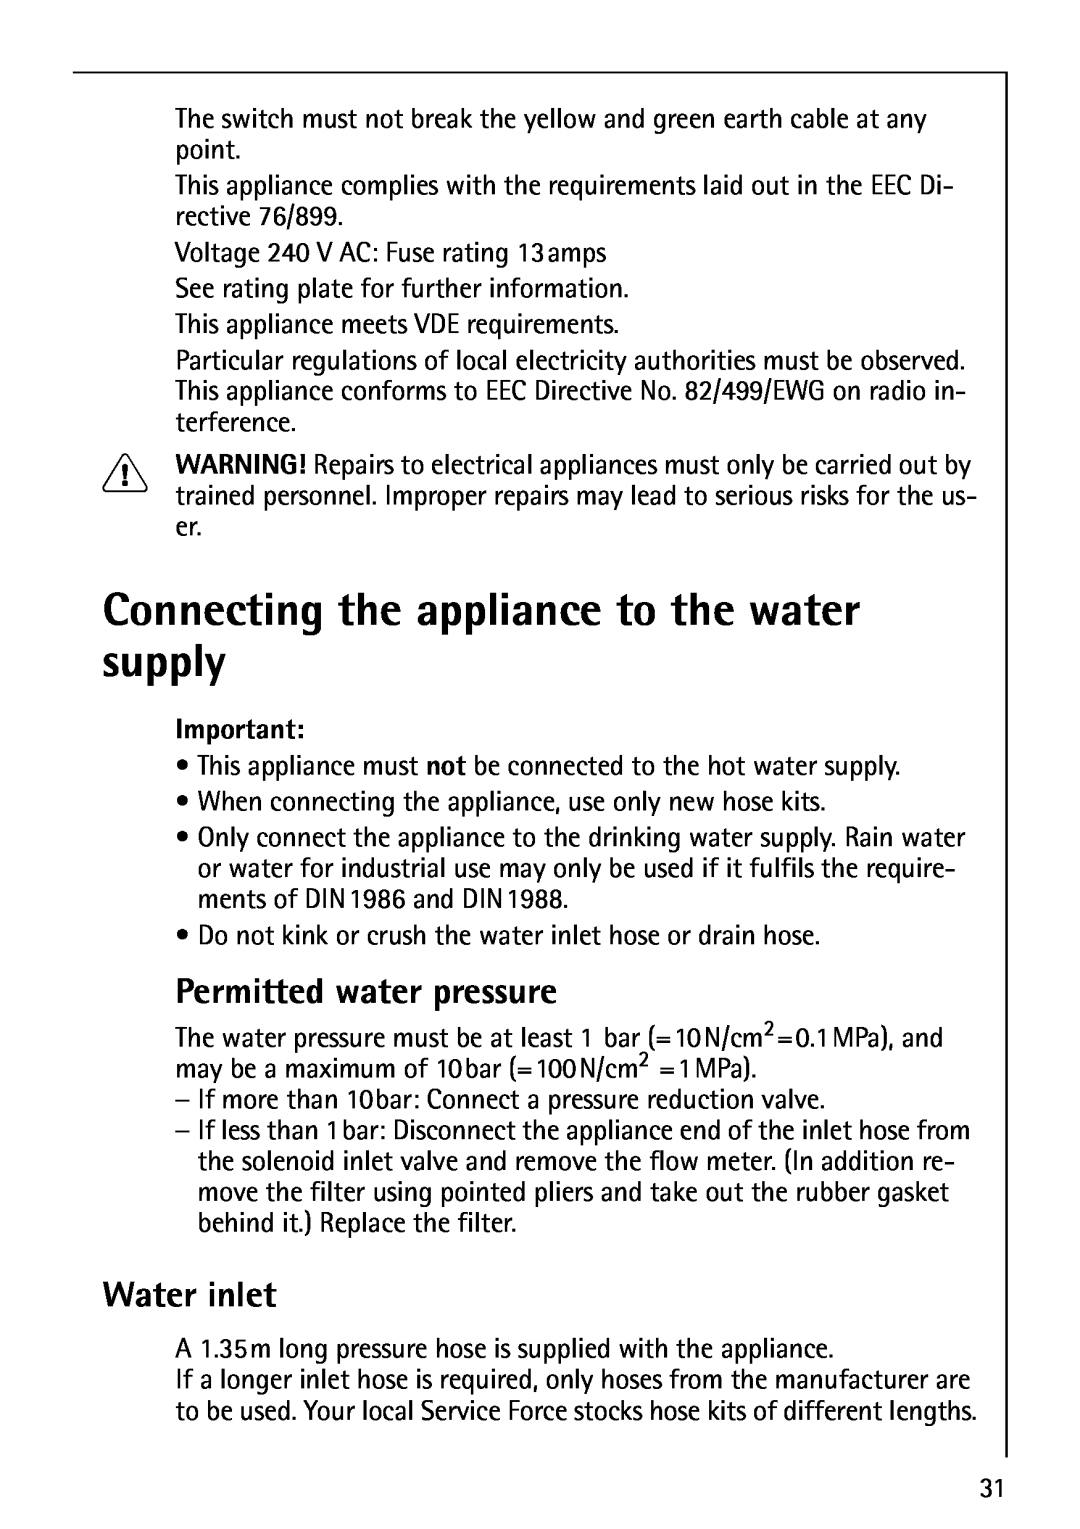 Electrolux LAVAMAT 74700 manual Connecting the appliance to the water supply, Permitted water pressure, Water inlet 